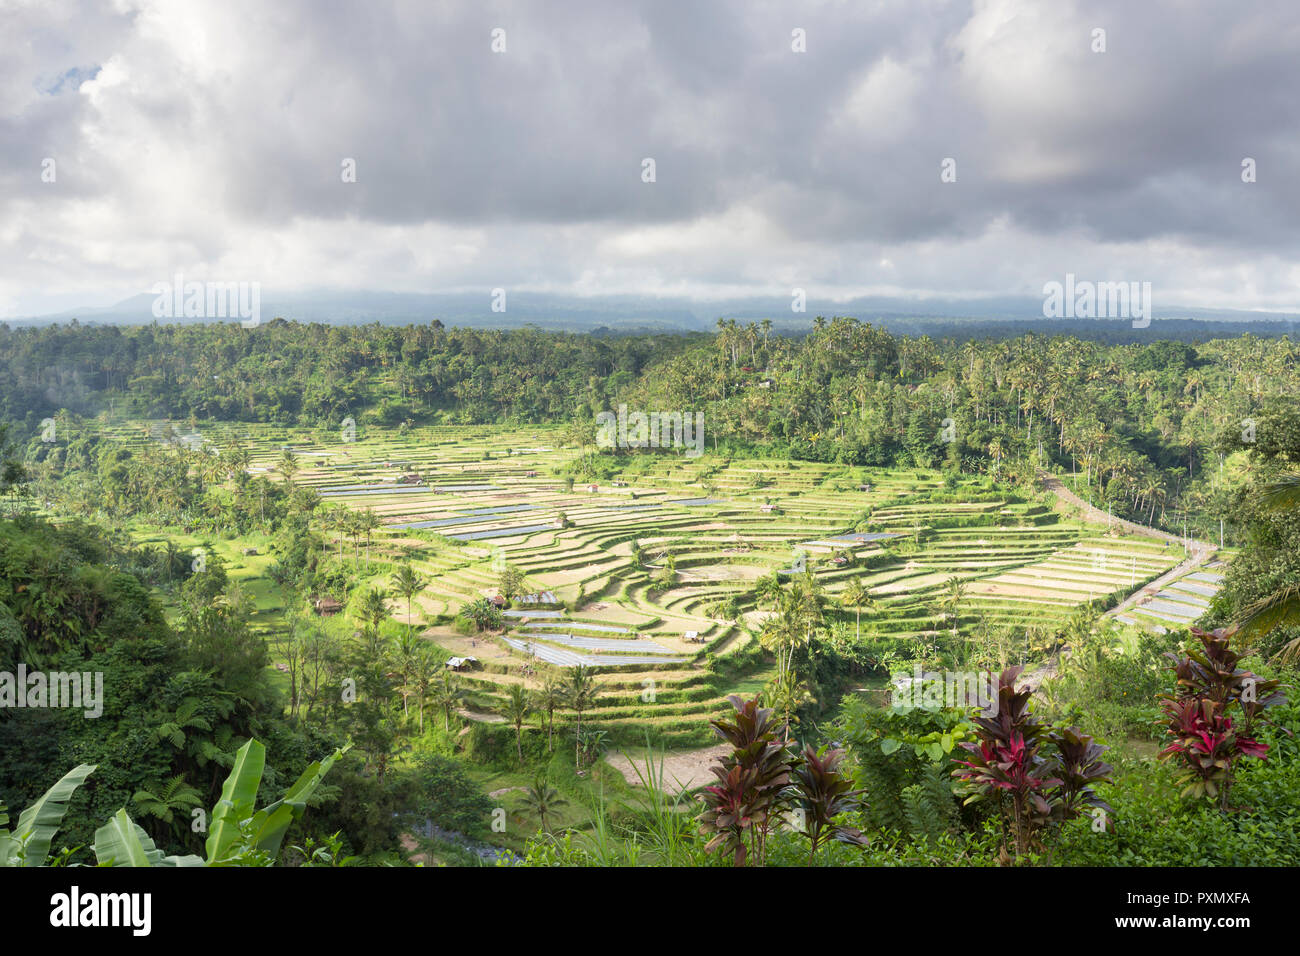 View of rice terraces, Rendang, Bali, Indonesia Stock Photo